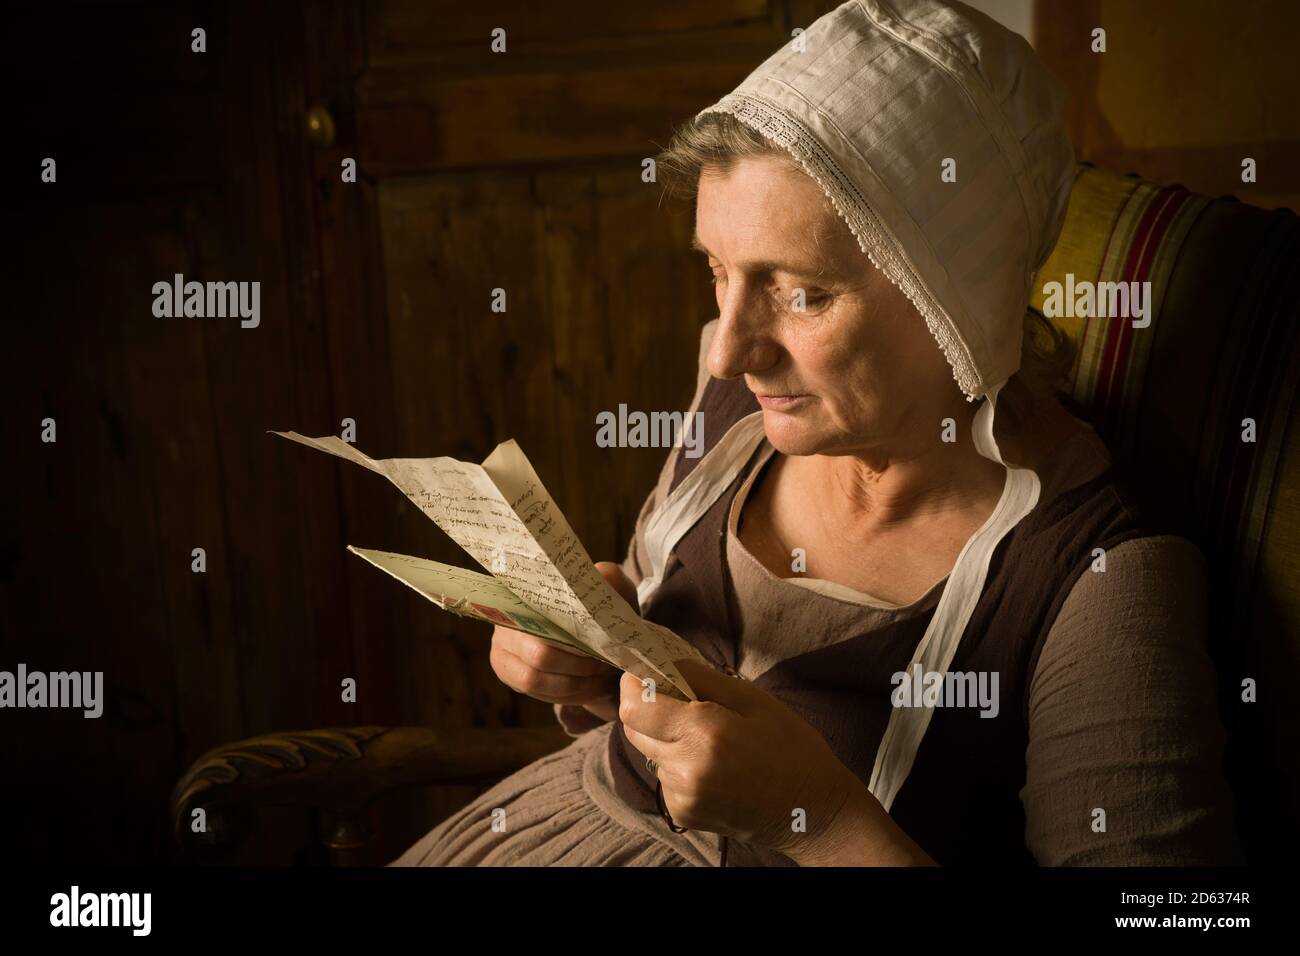 Portrait of a ature woman reading in an Old Master or Renaissance style Stock Photo